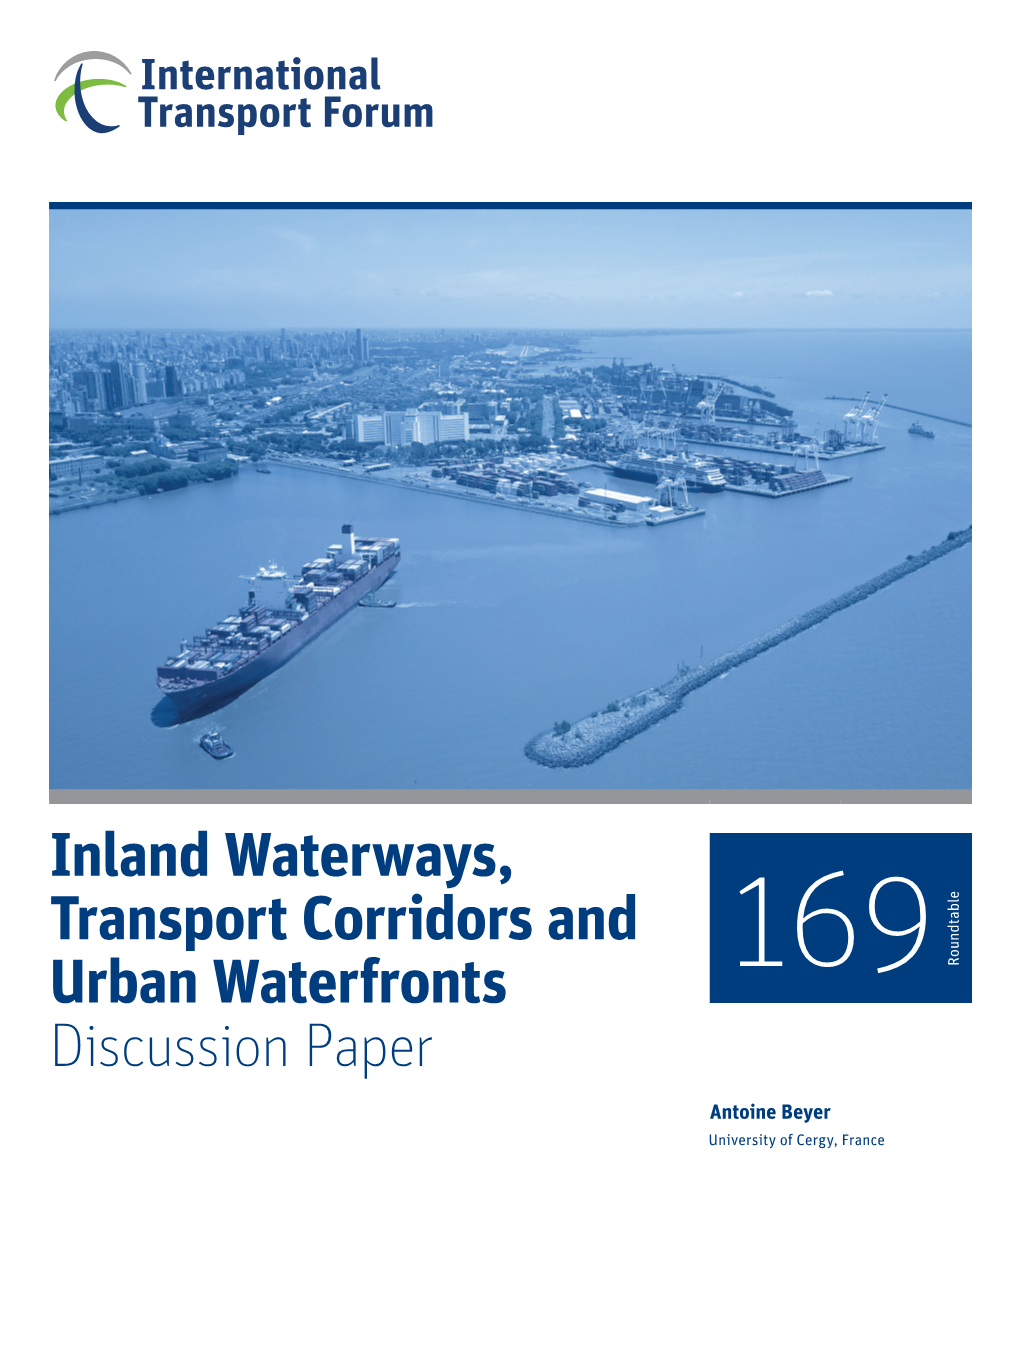 Inland Waterways, Transport Corridors and Urban Waterfronts 169 Roundtable Discussion Paper